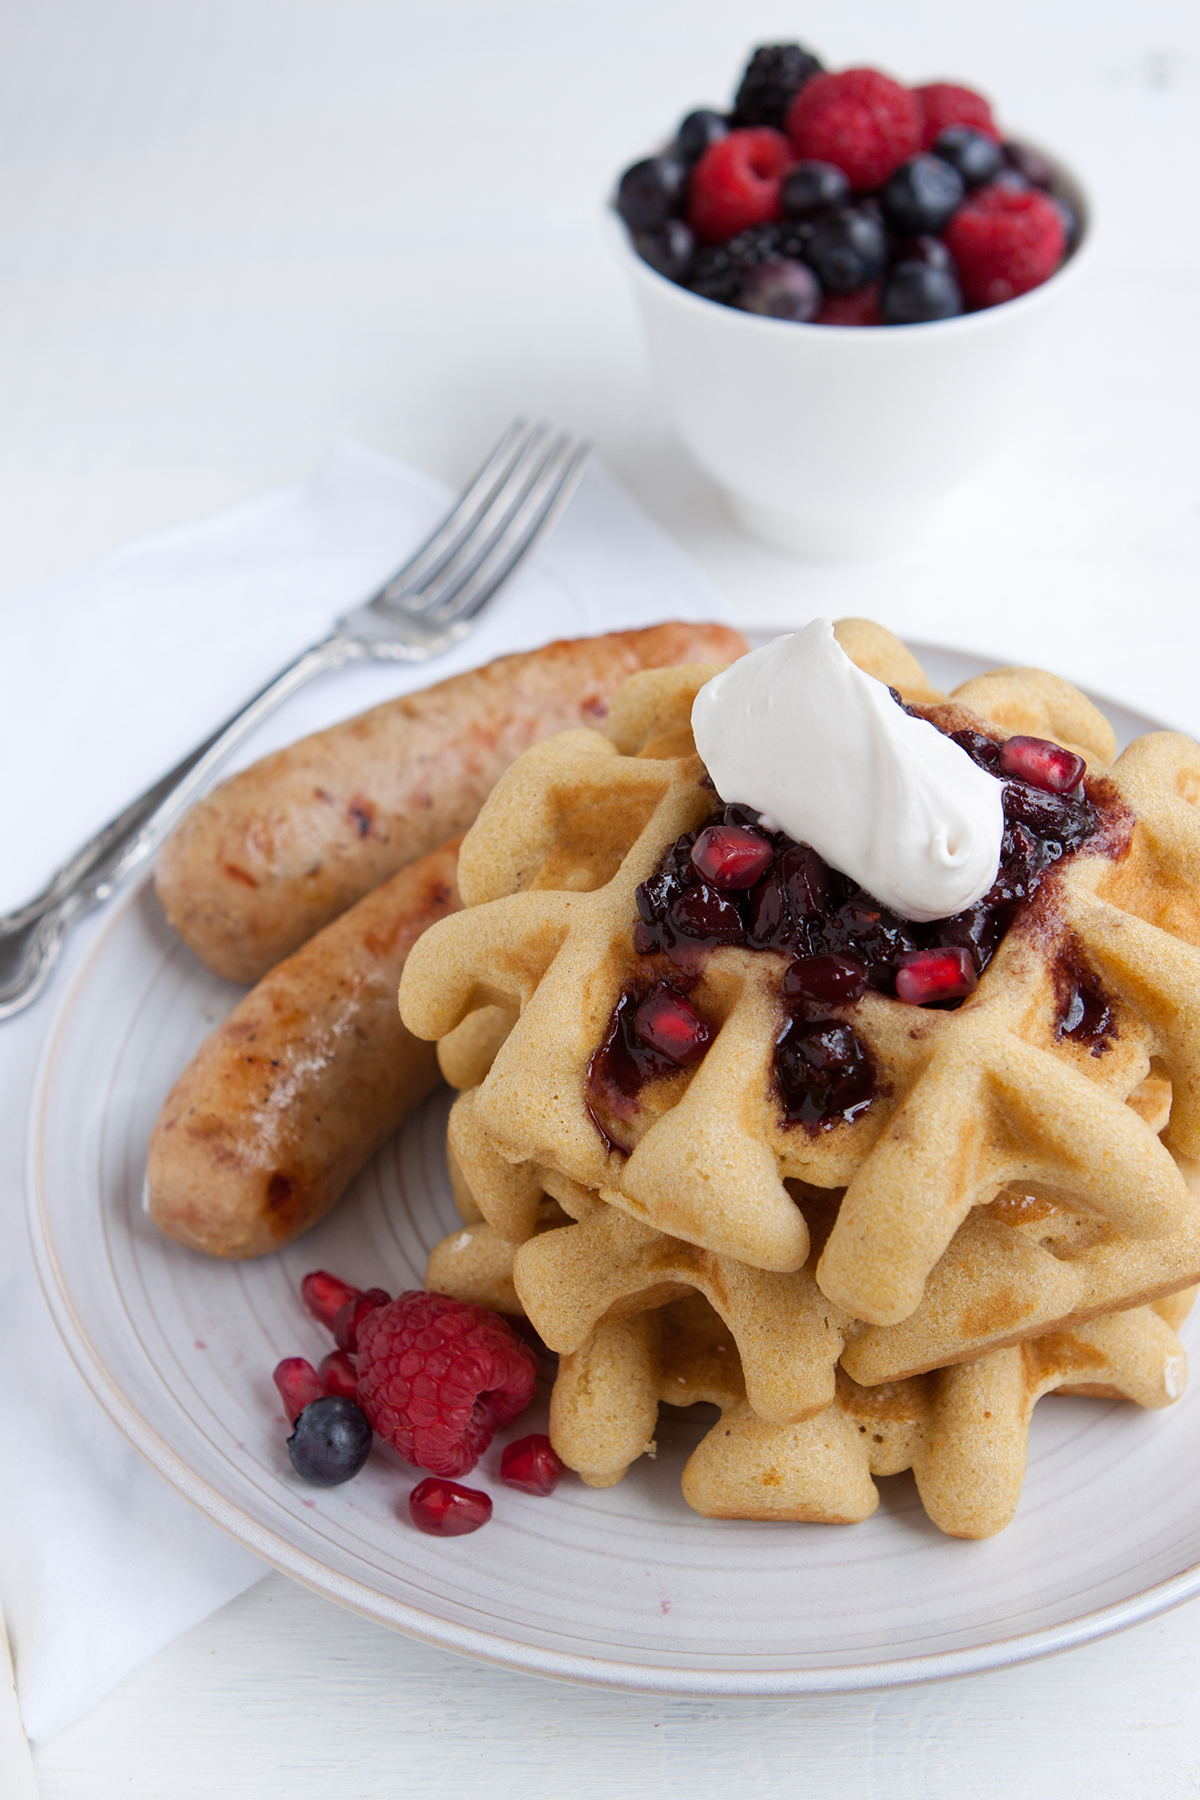 Polenta Waffles with Balsamic Berry Compote